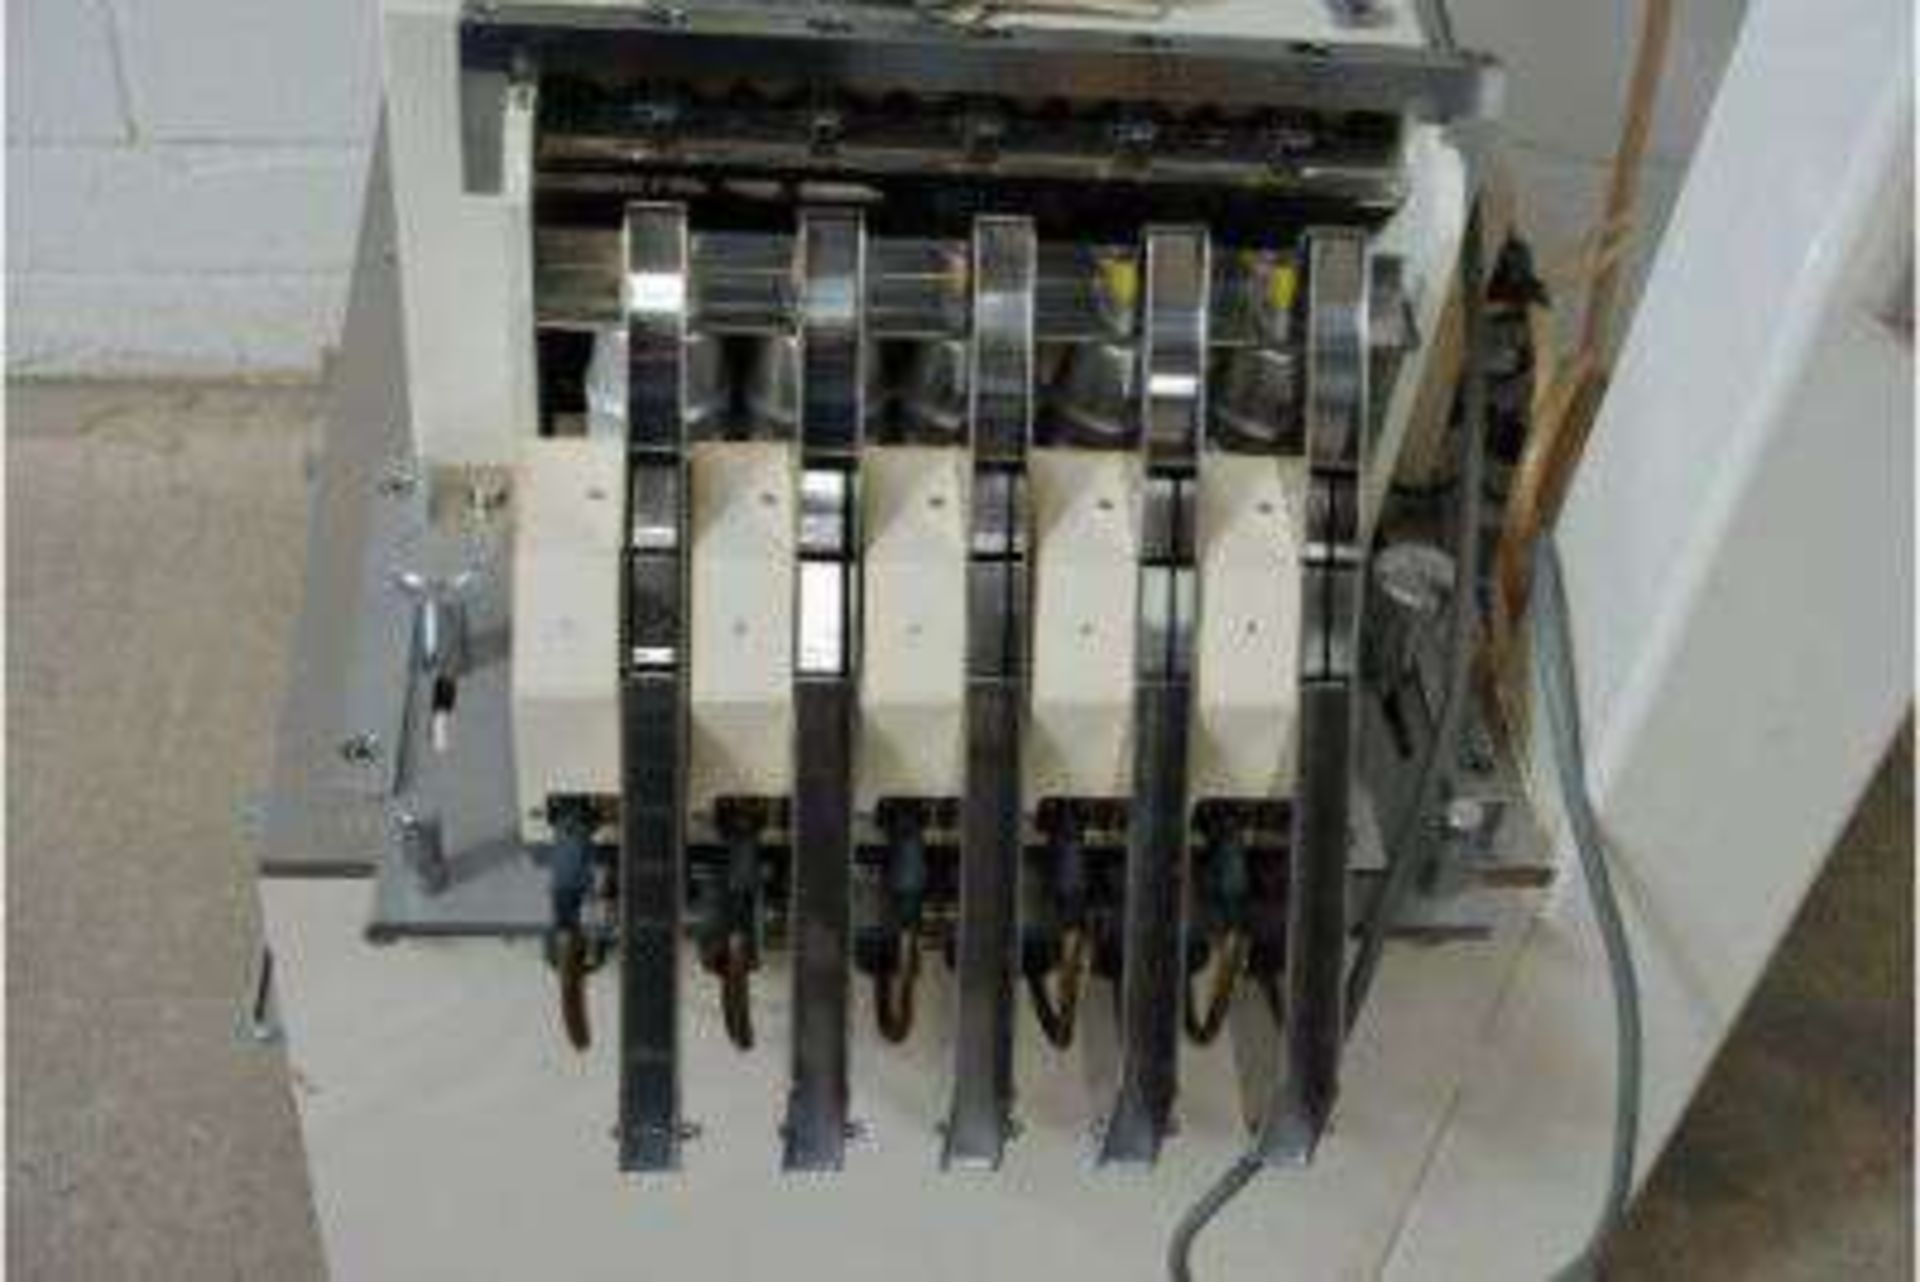 Aniritsu Capsule / Tablet Checkweigher with Data Recorder - Image 8 of 8